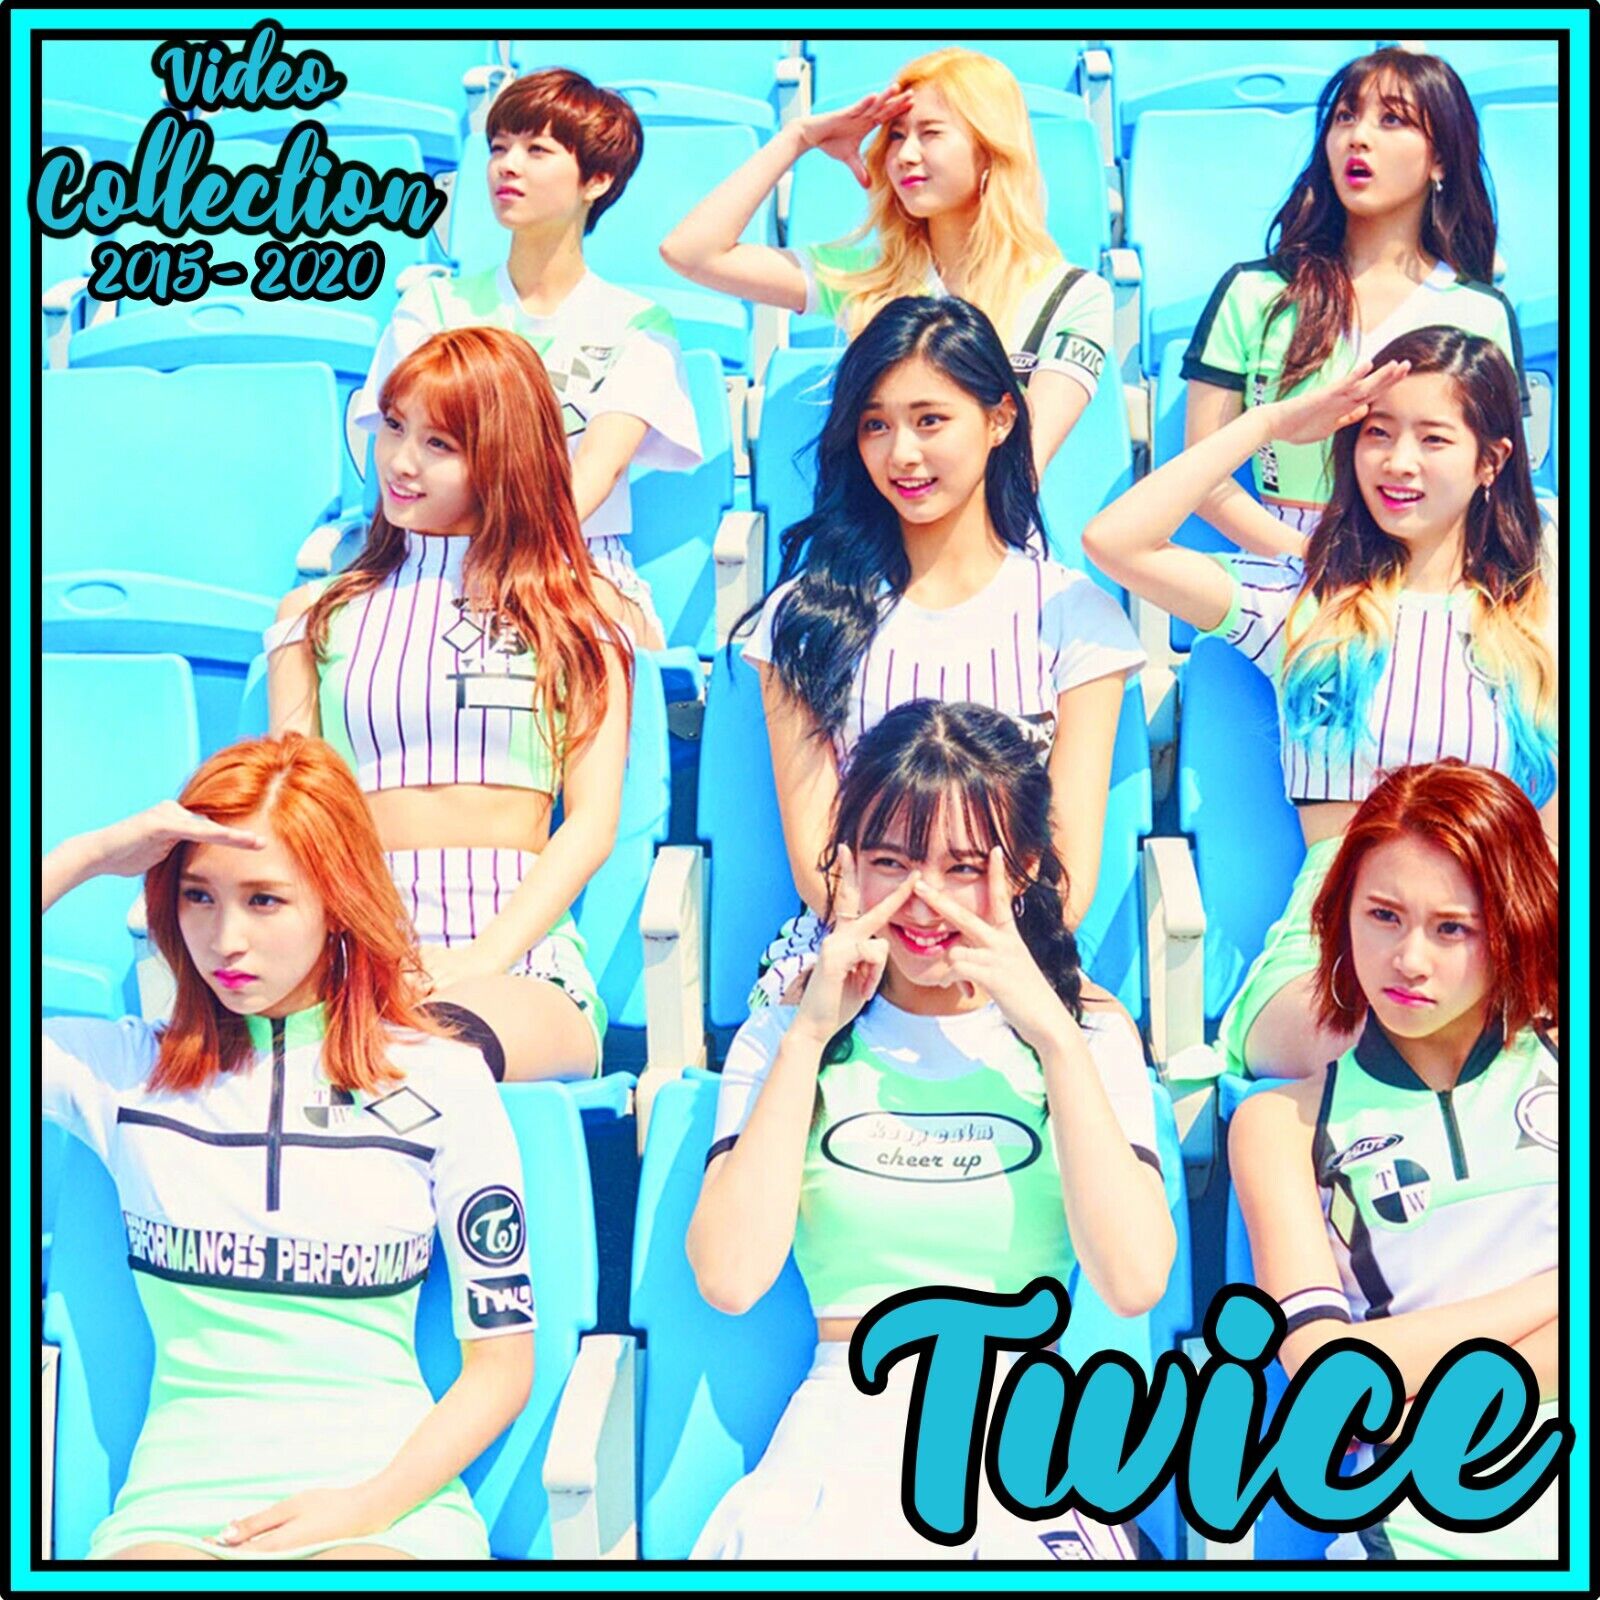 Twice  Video Collection  2015 to 2022